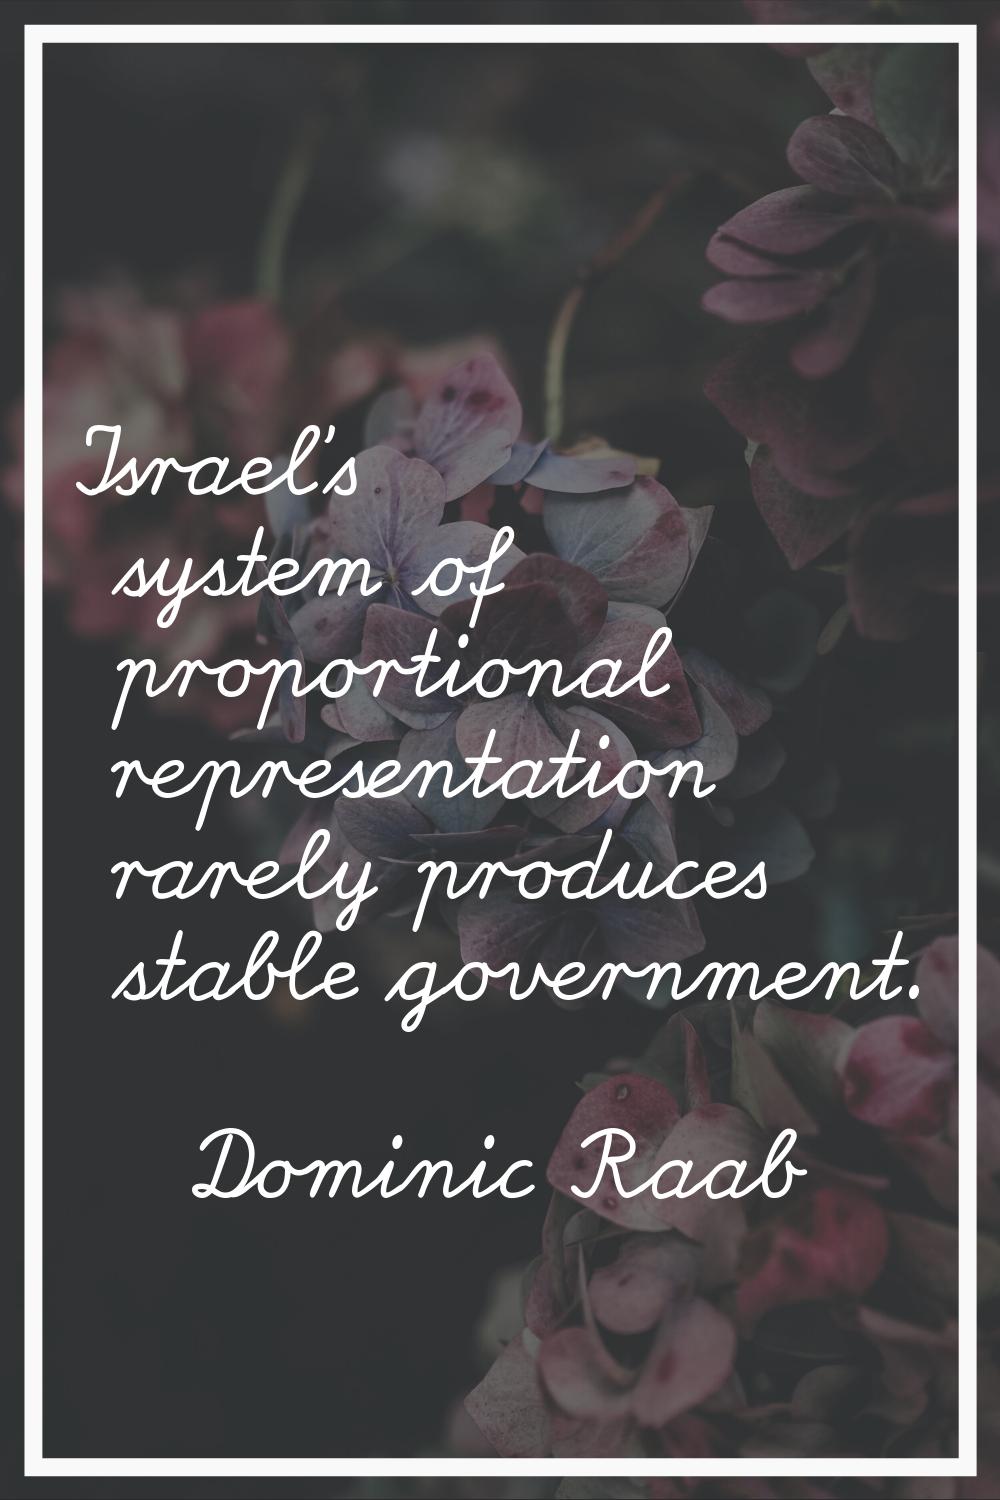 Israel's system of proportional representation rarely produces stable government.